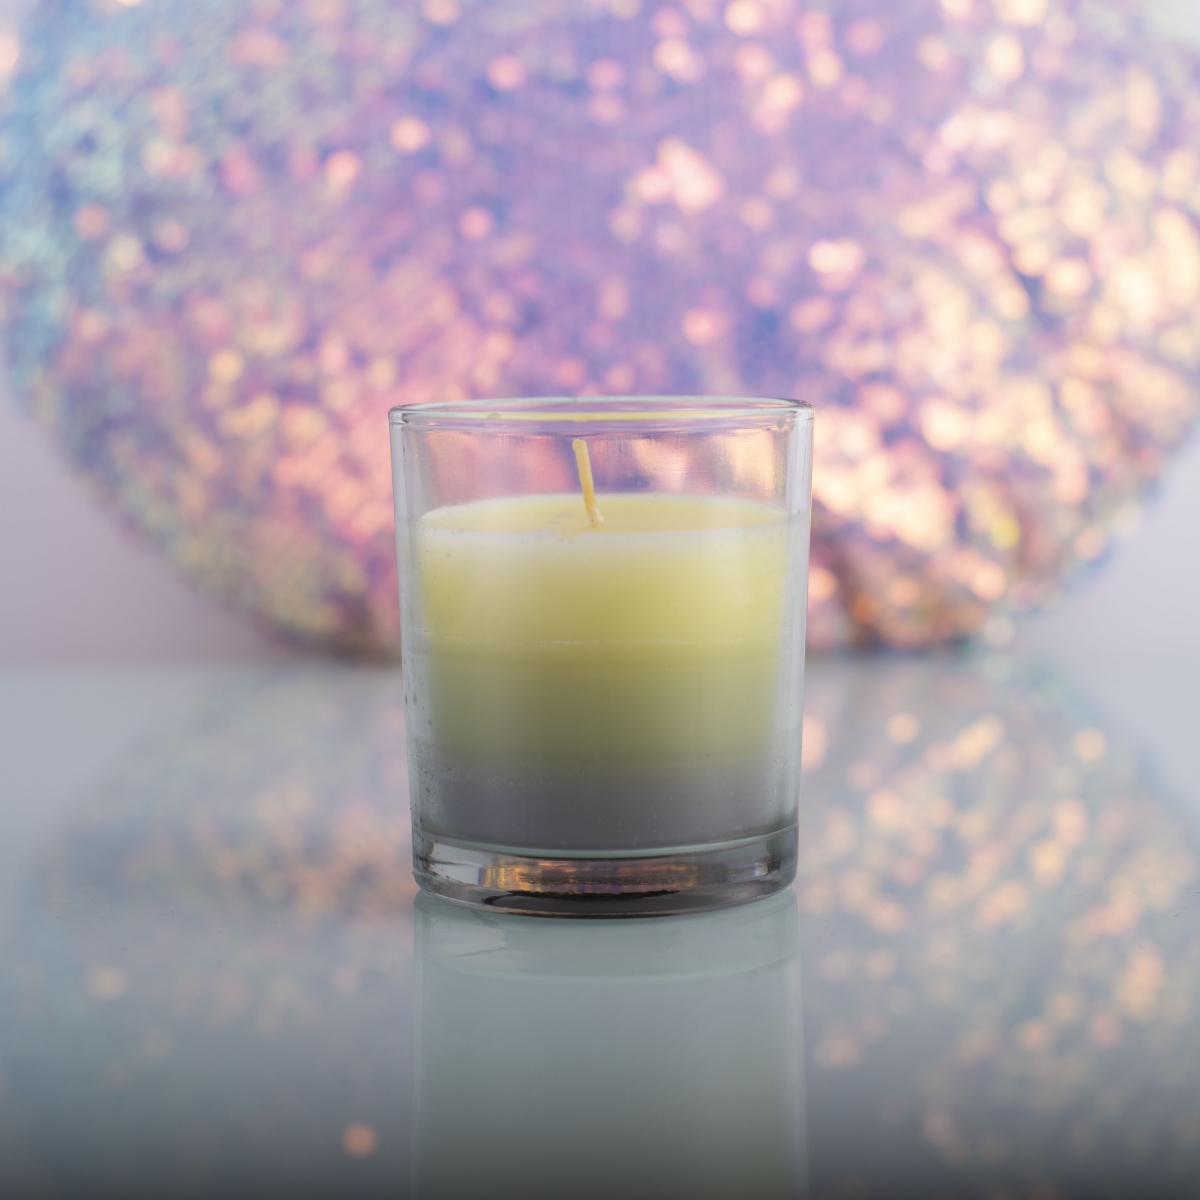 Fragrance Layered Candles : In Glass Jar , Scented Candles , China Factory , Cheap Price-HOWCANDLE-Candles,Scented Candles,Aromatherapy Candles,Soy Candles,Vegan Candles,Jar Candles,Pillar Candles,Candle Gift Sets,Essential Oils,Reed Diffuser,Candle Holder,